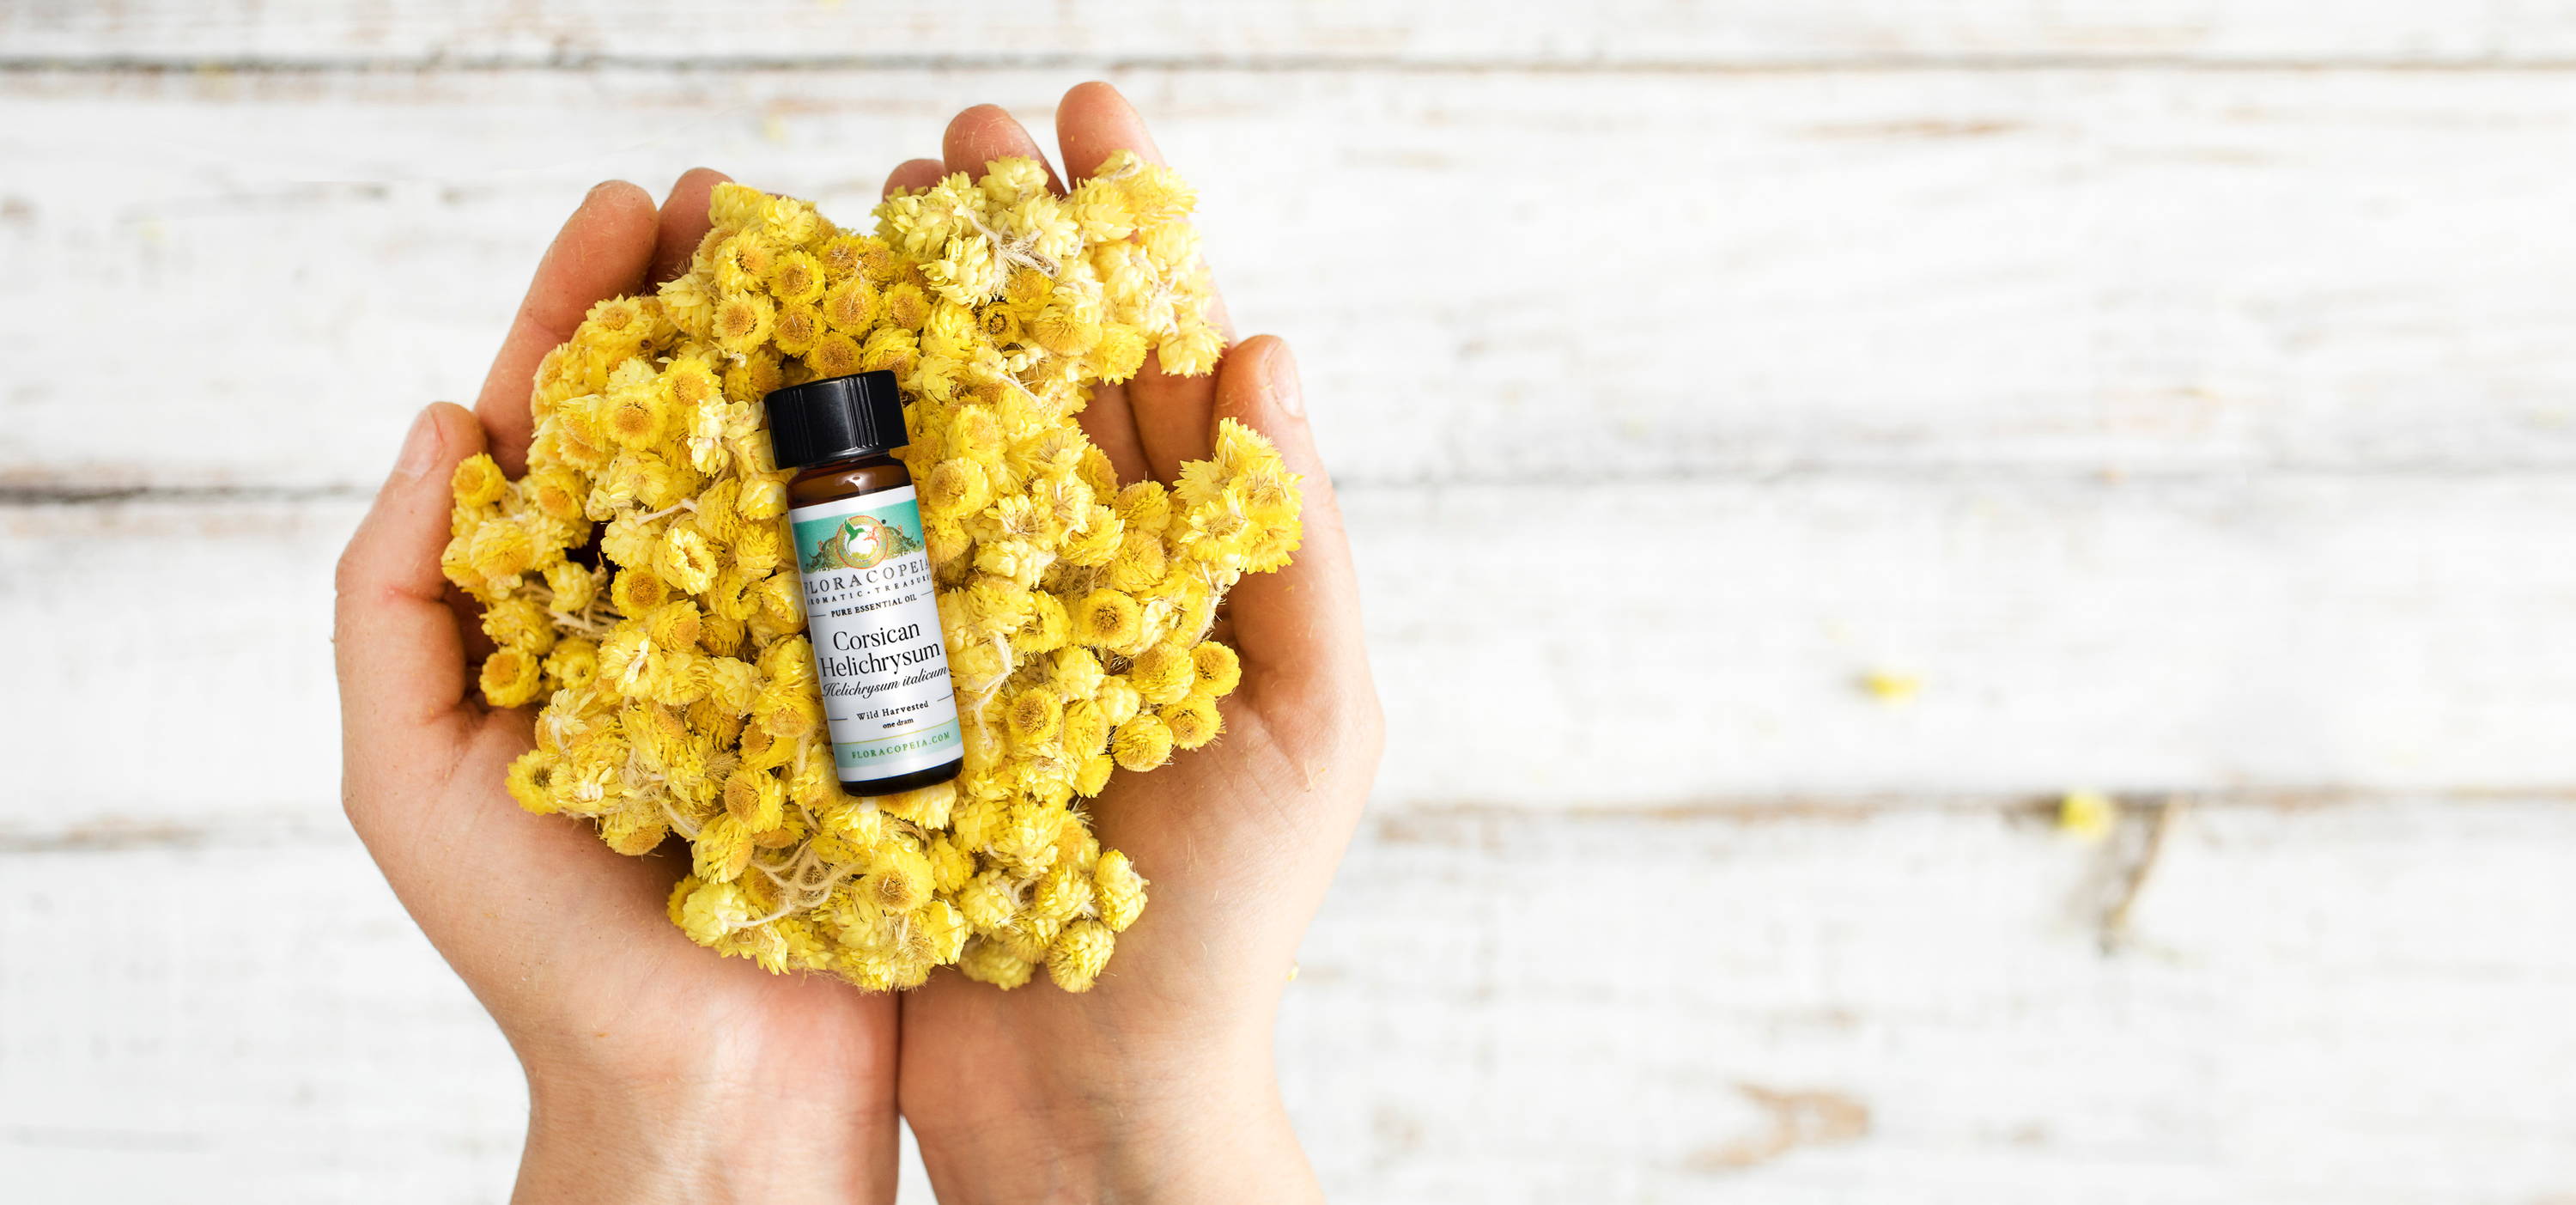 helichrysum essential oil and flowers in hands